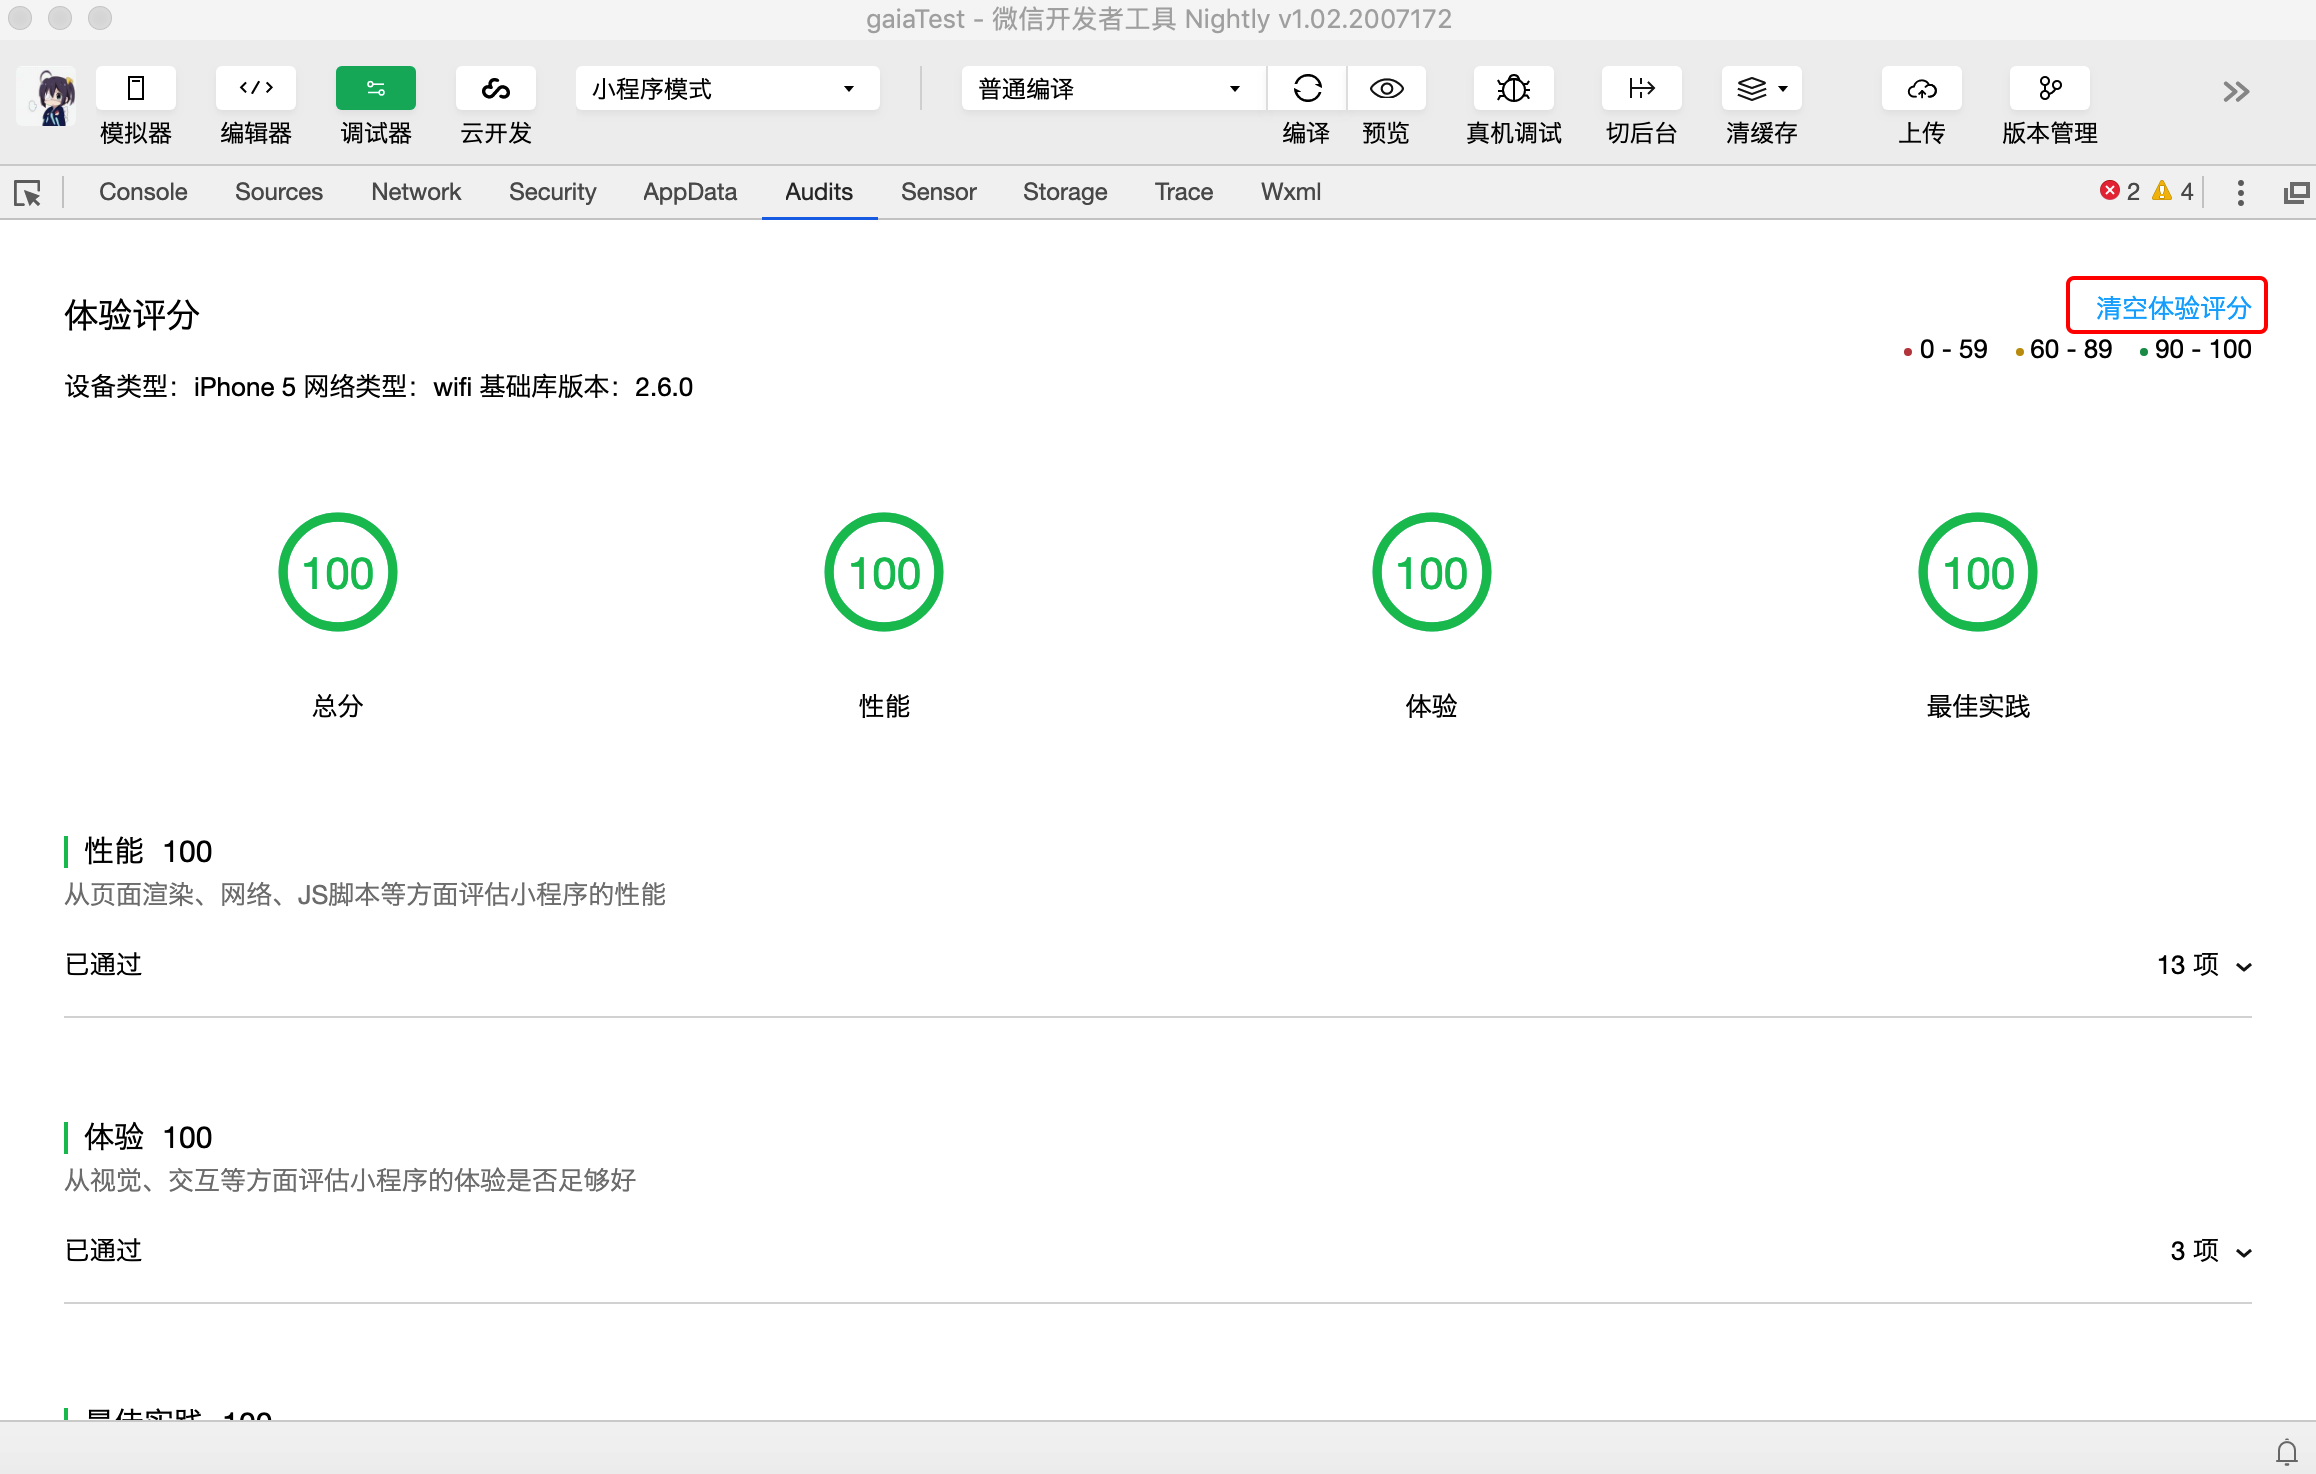 WeChat Gadget Tool Experience Rating